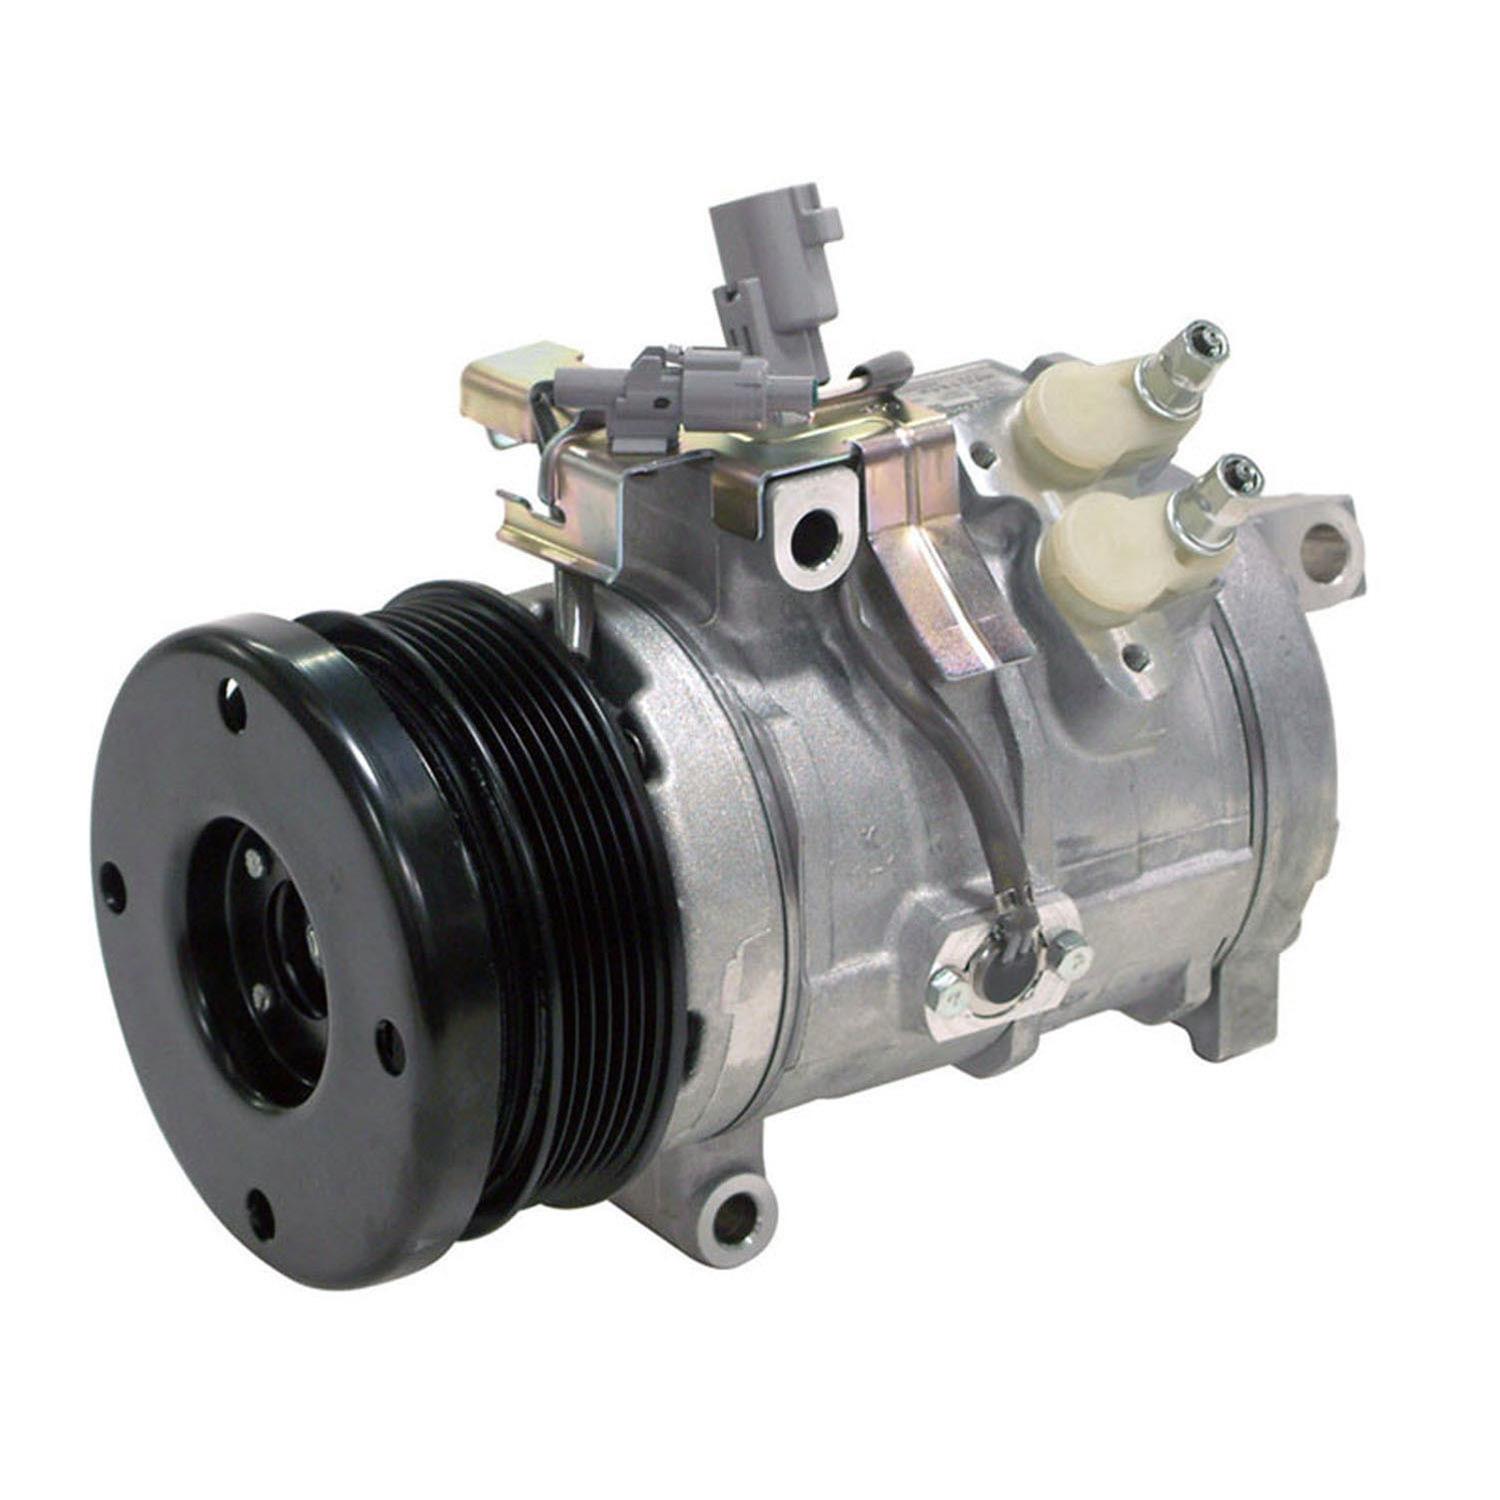 10S20C Air Conditioning Compressor  883100C061, 8831035881, 883106A161, 883200C070, 883200C07084, 883200C100, 883200C101, 883206A110, 883206A111 for Lexus GX470 Toyota SEQUOIA and Toyota Tundra 